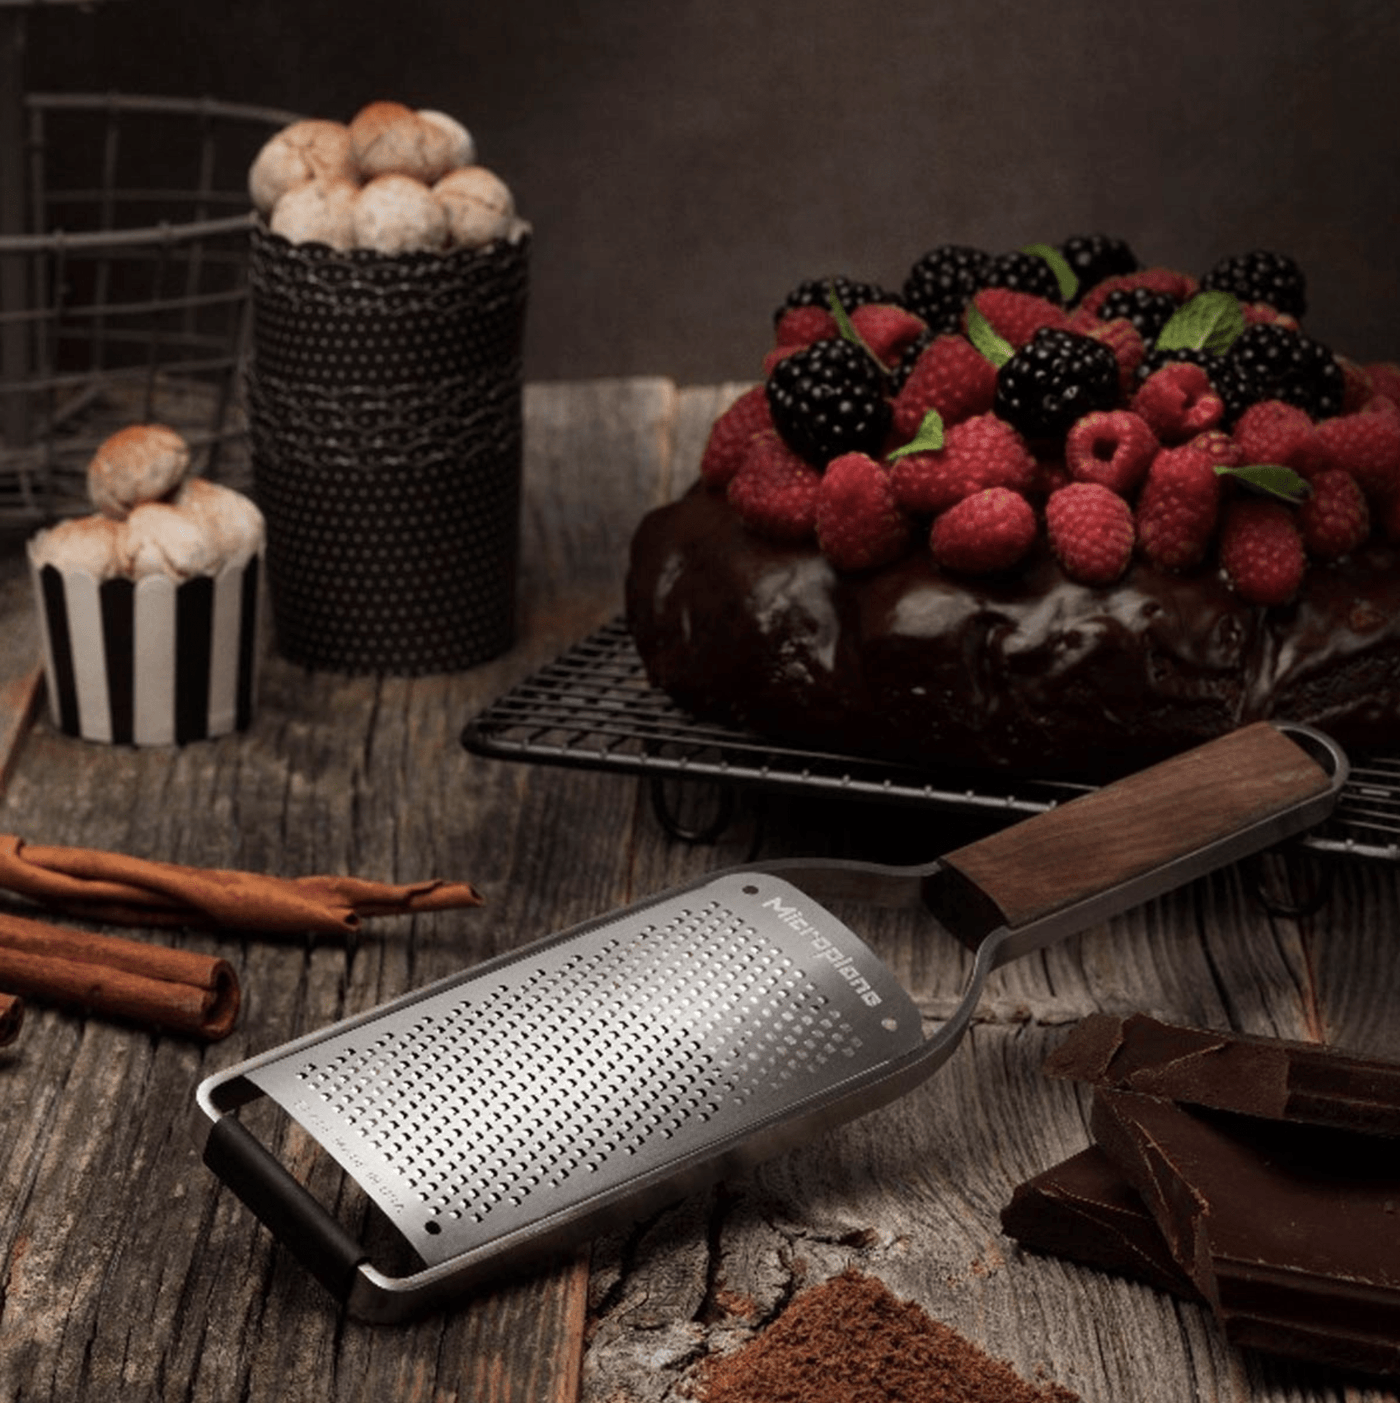 Microplane Chocolate Cup Grater, chocolate grater